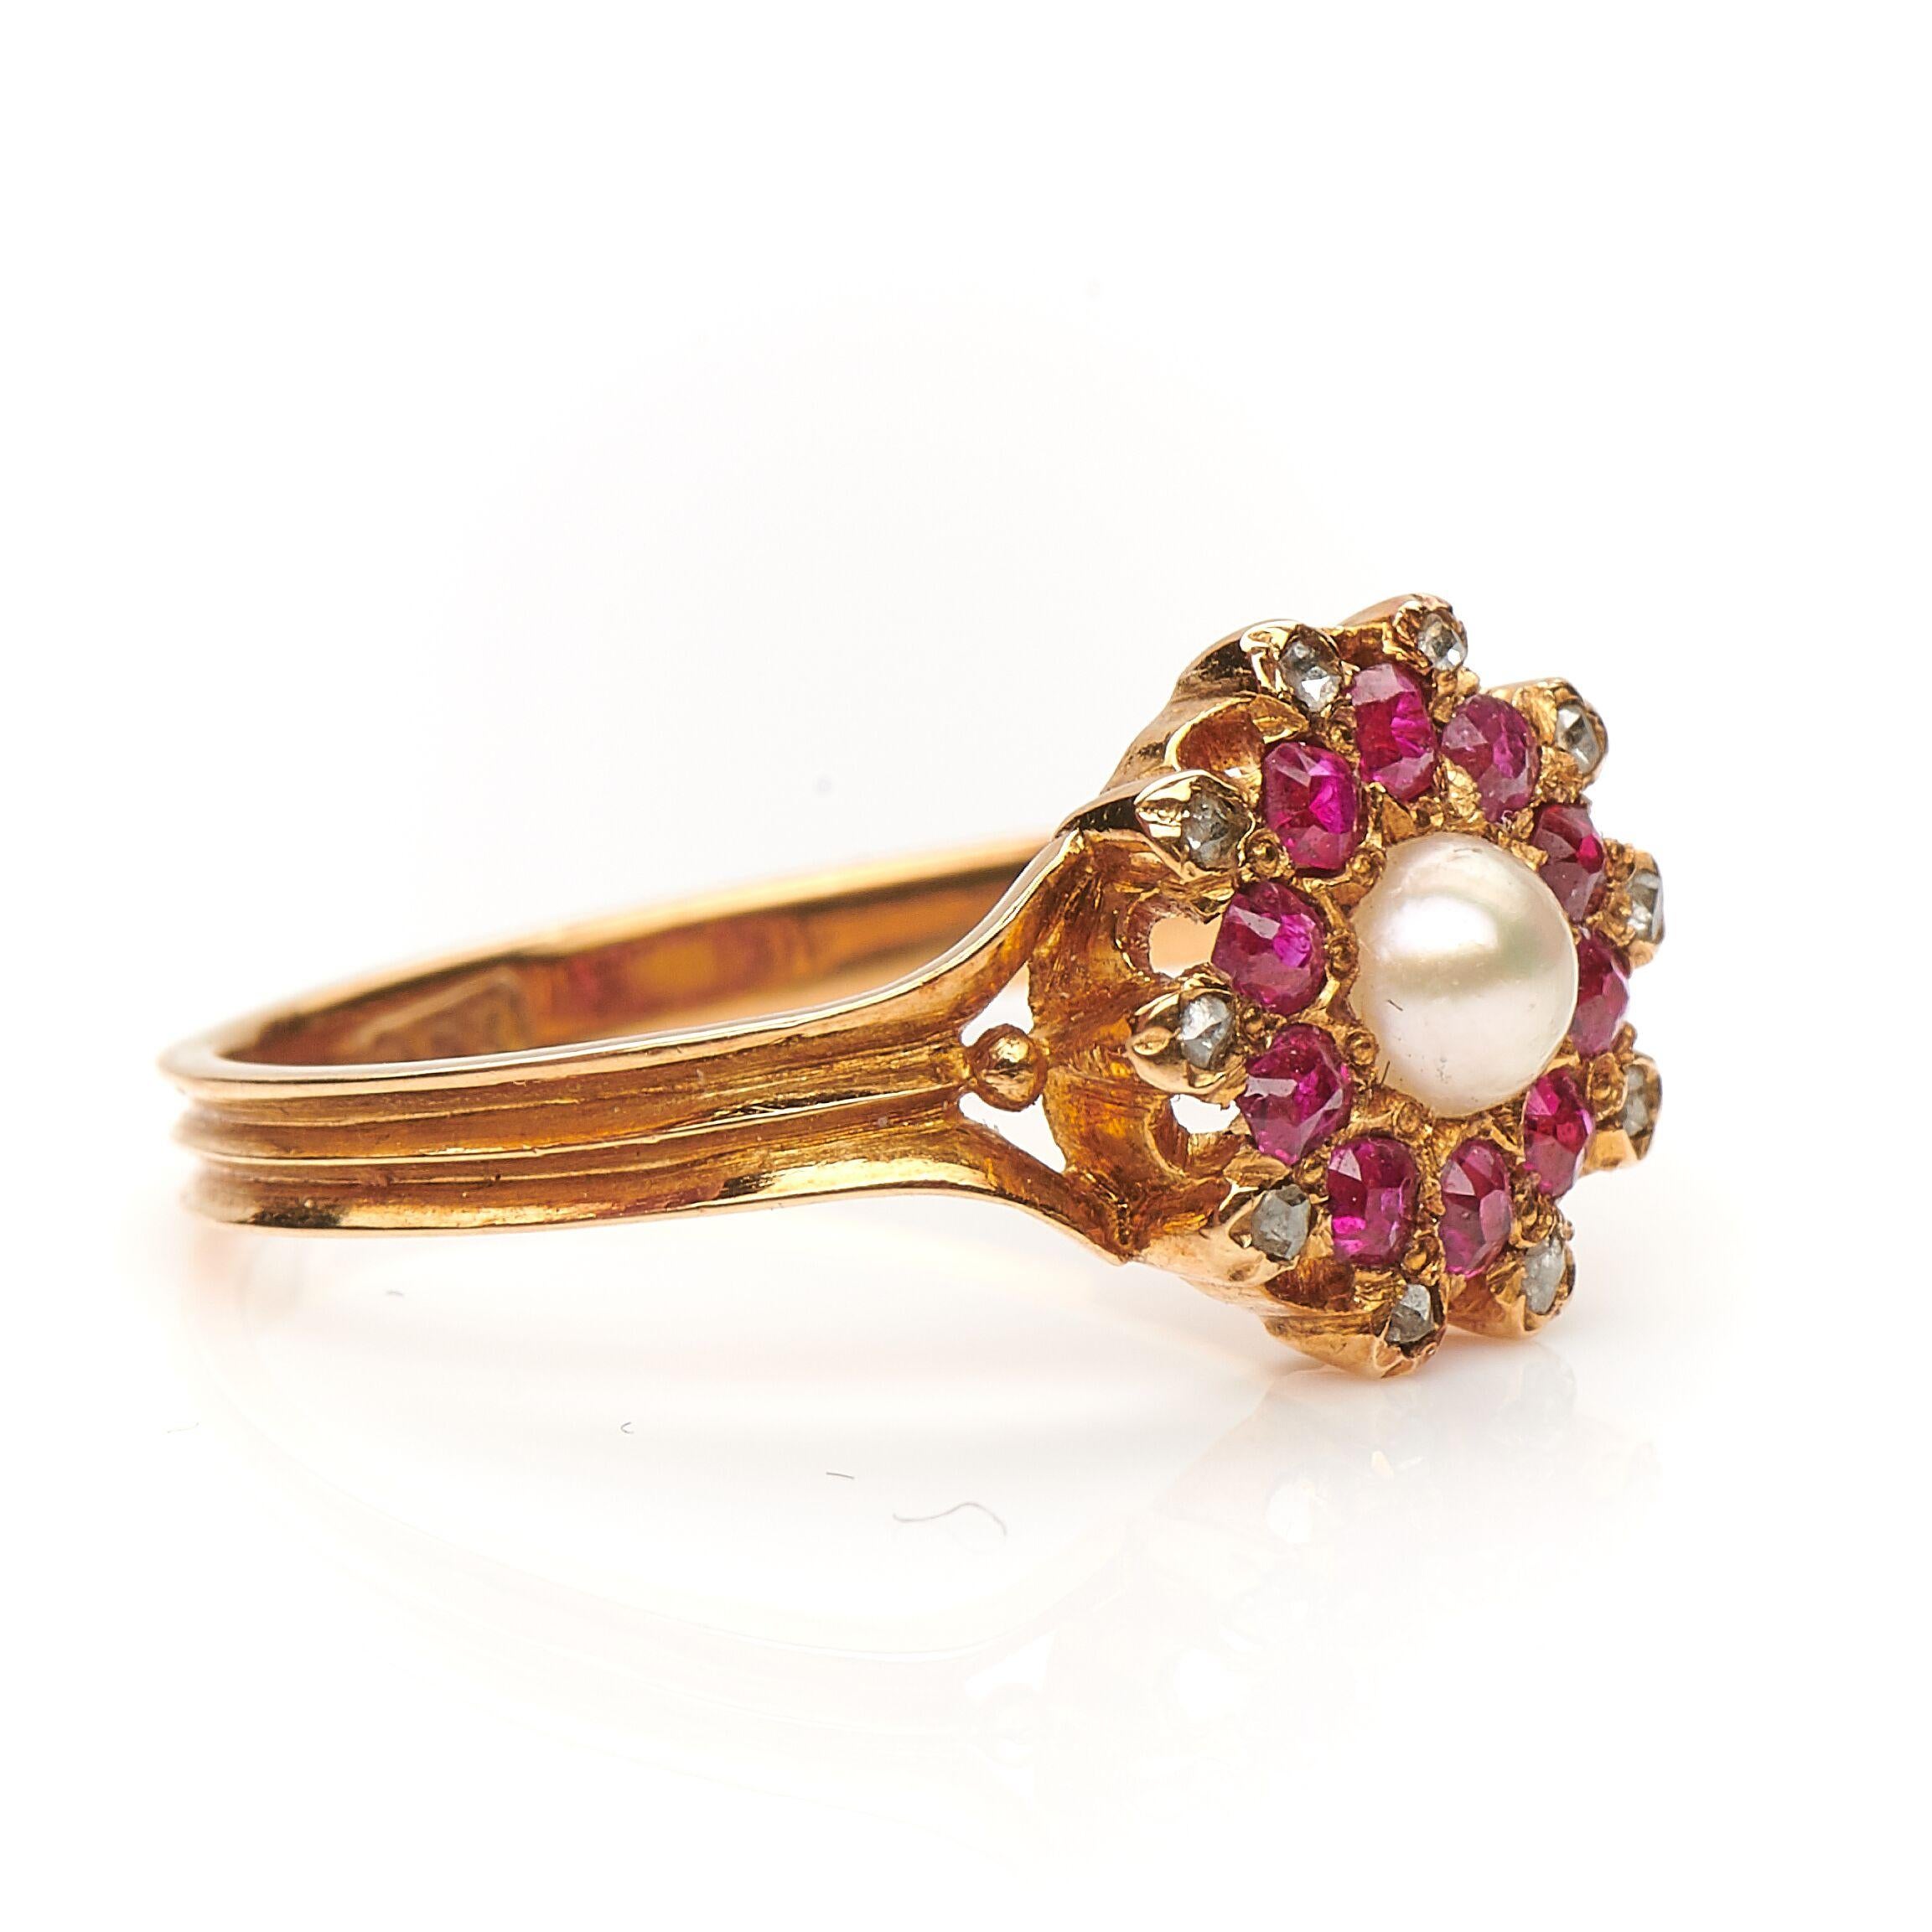 Edwardian, ruby, diamond and pearl dress ring, circa 1910. Set to centre a natural spilt pearl framed by rubies with an outer boarder of rose-cut diamonds. The wonderful colour combination is what makes this ring unique, the cluster is a burst of